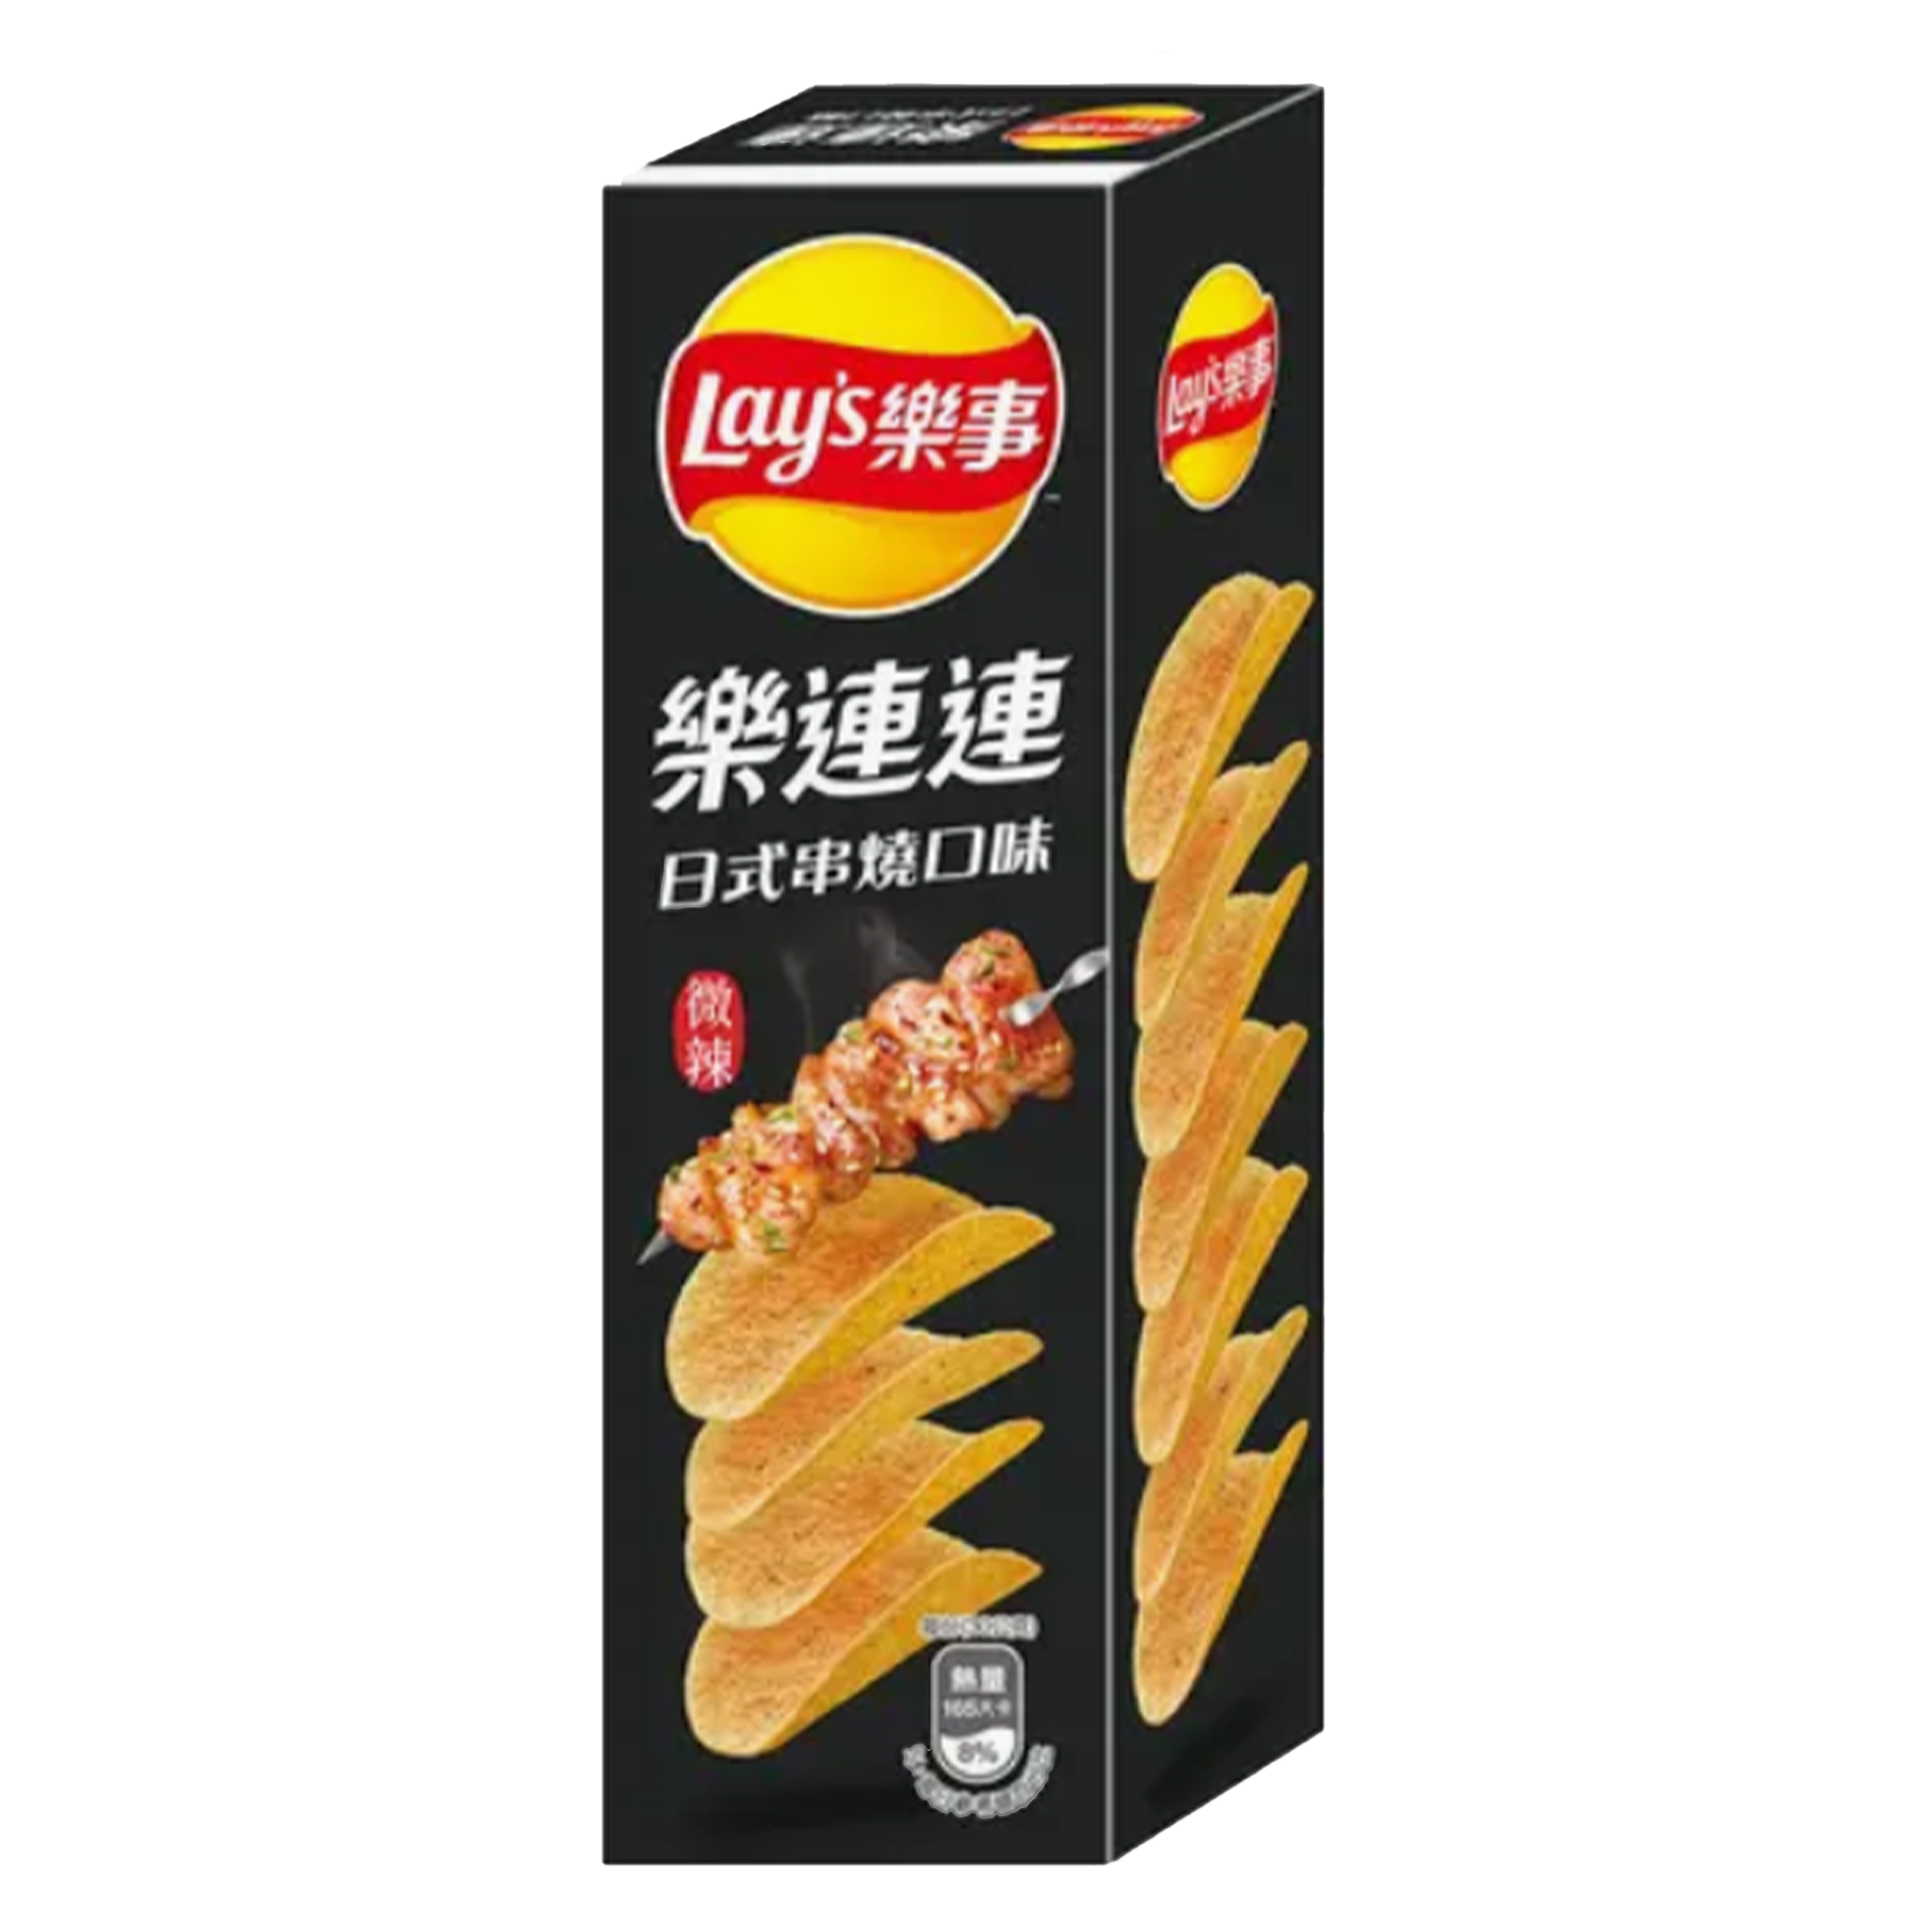 Lays Stax - Spicy Grilled Yakitori (Asia)